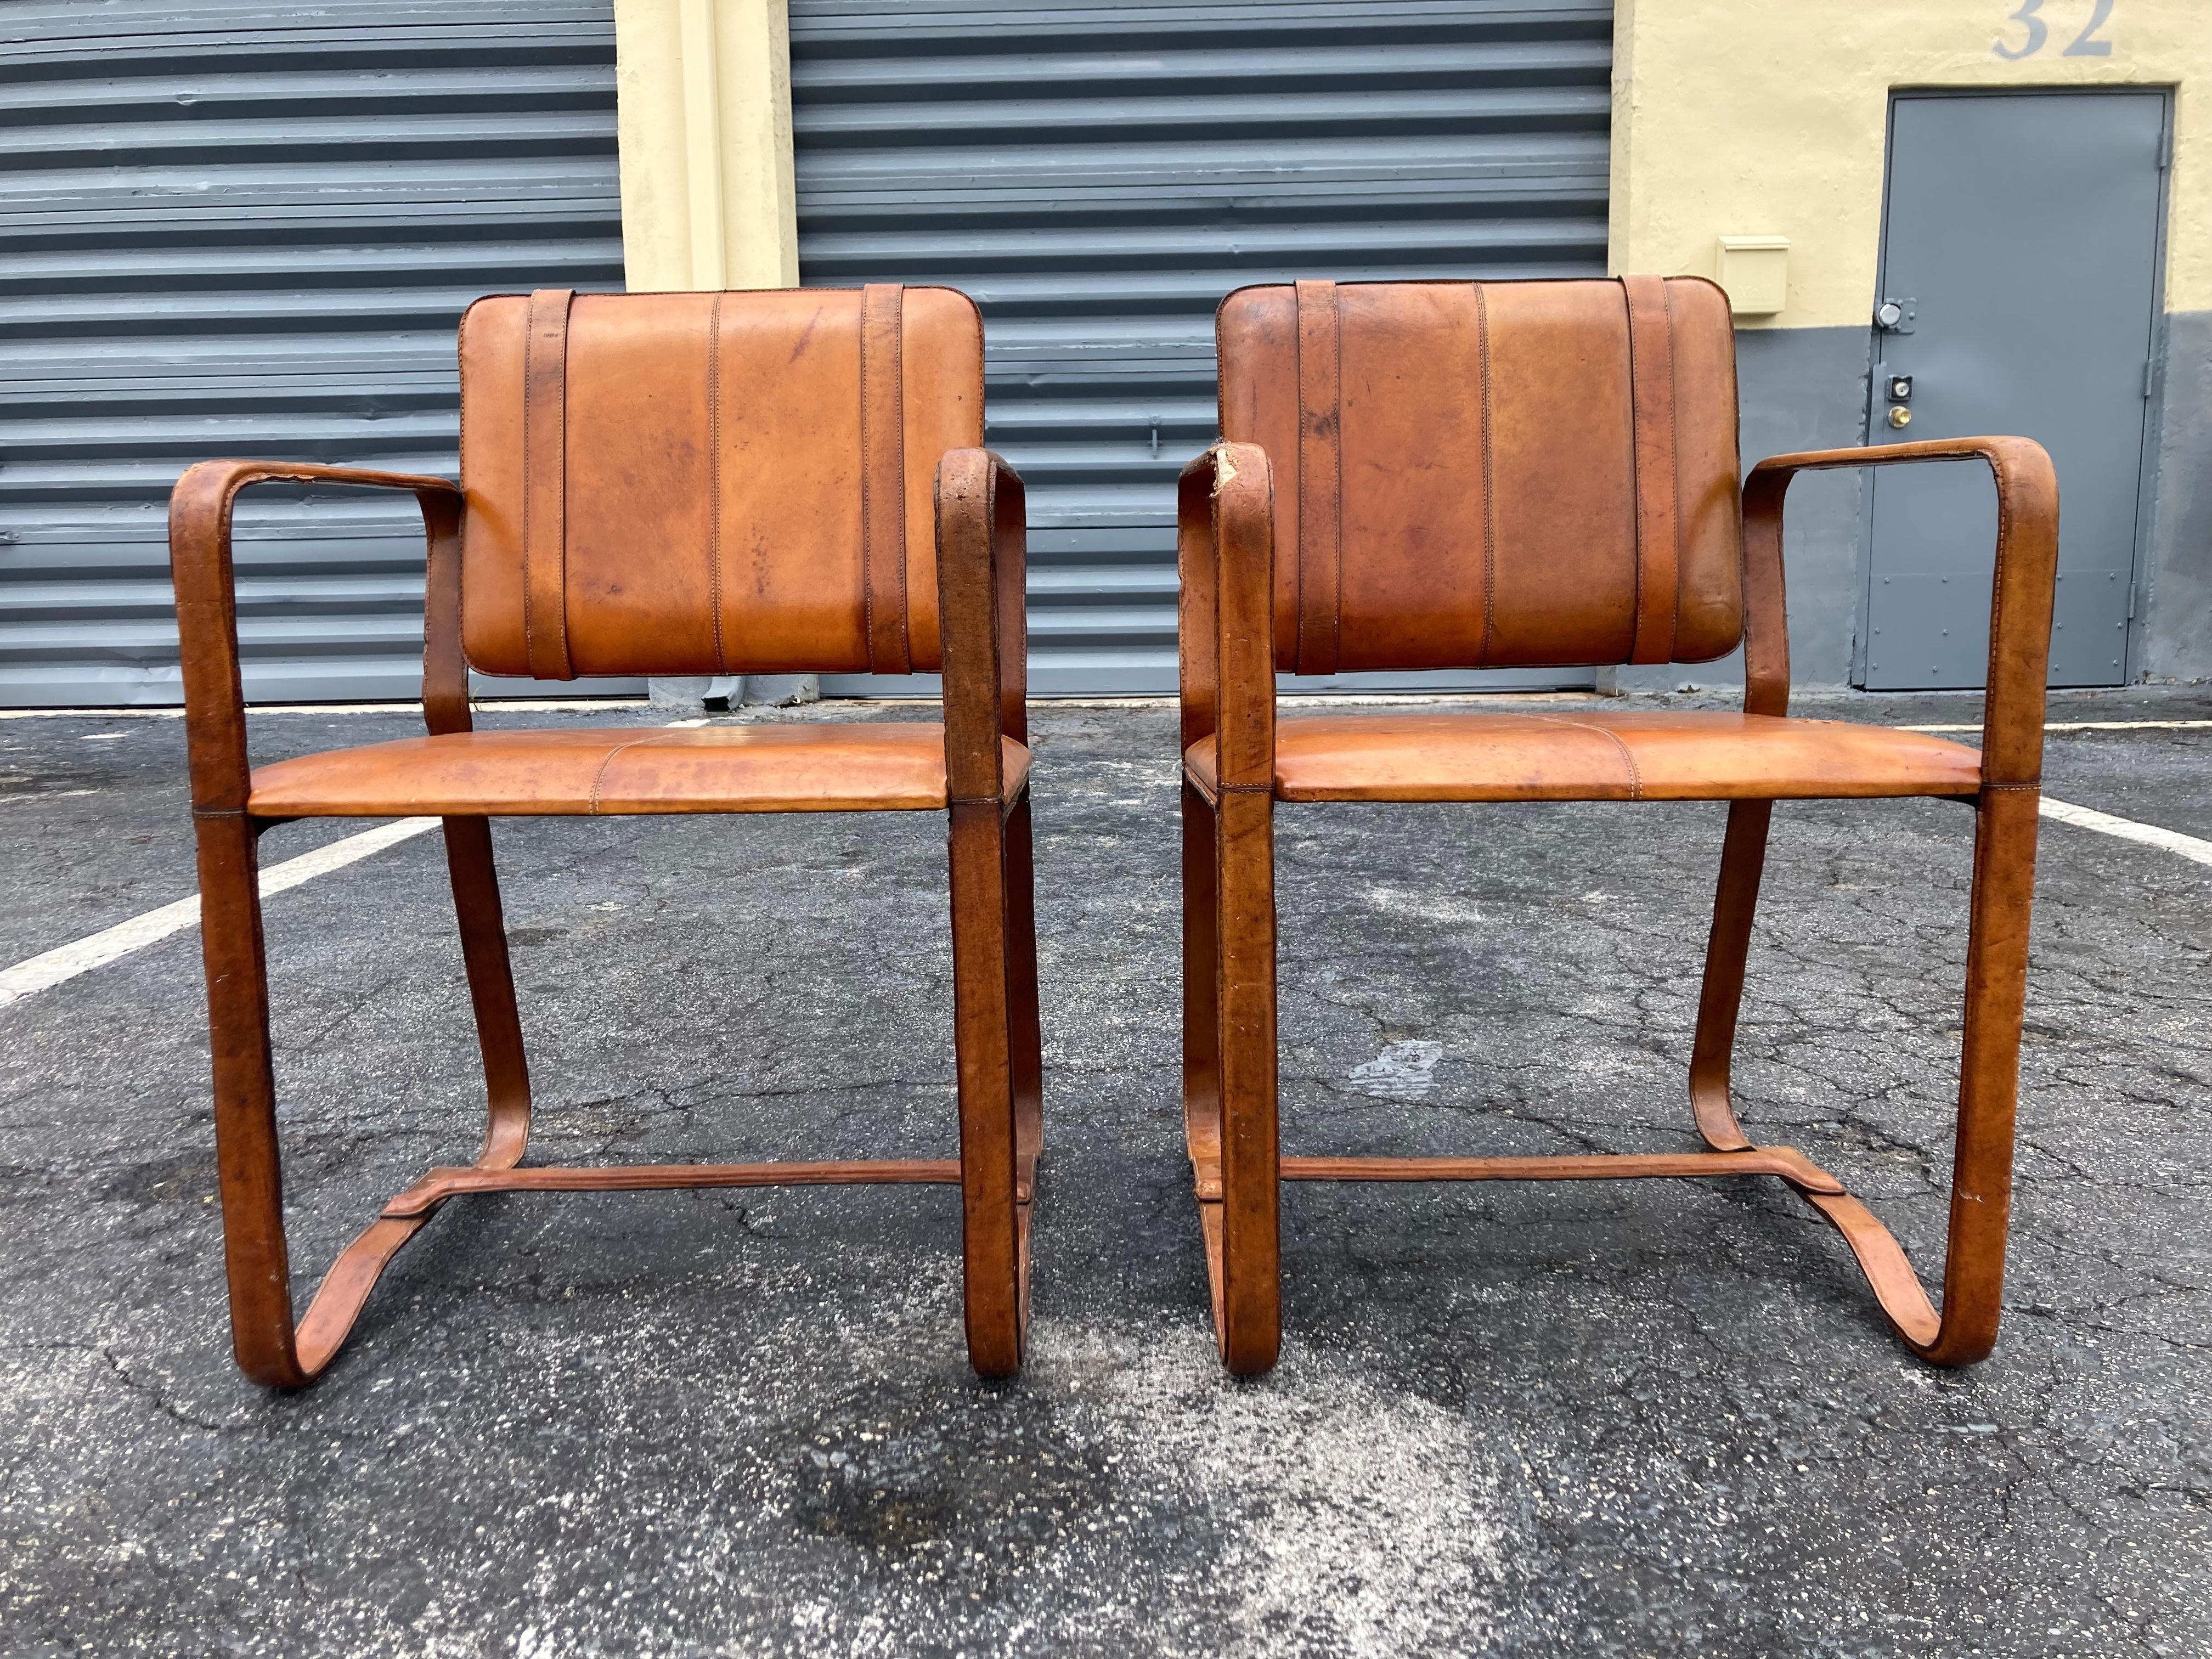 Pair of leather wrapped armchairs in the style of Jacques Adnet, Cognac leather with strong patina and damages. The chairs are sturdy.
Arm height is 27”.